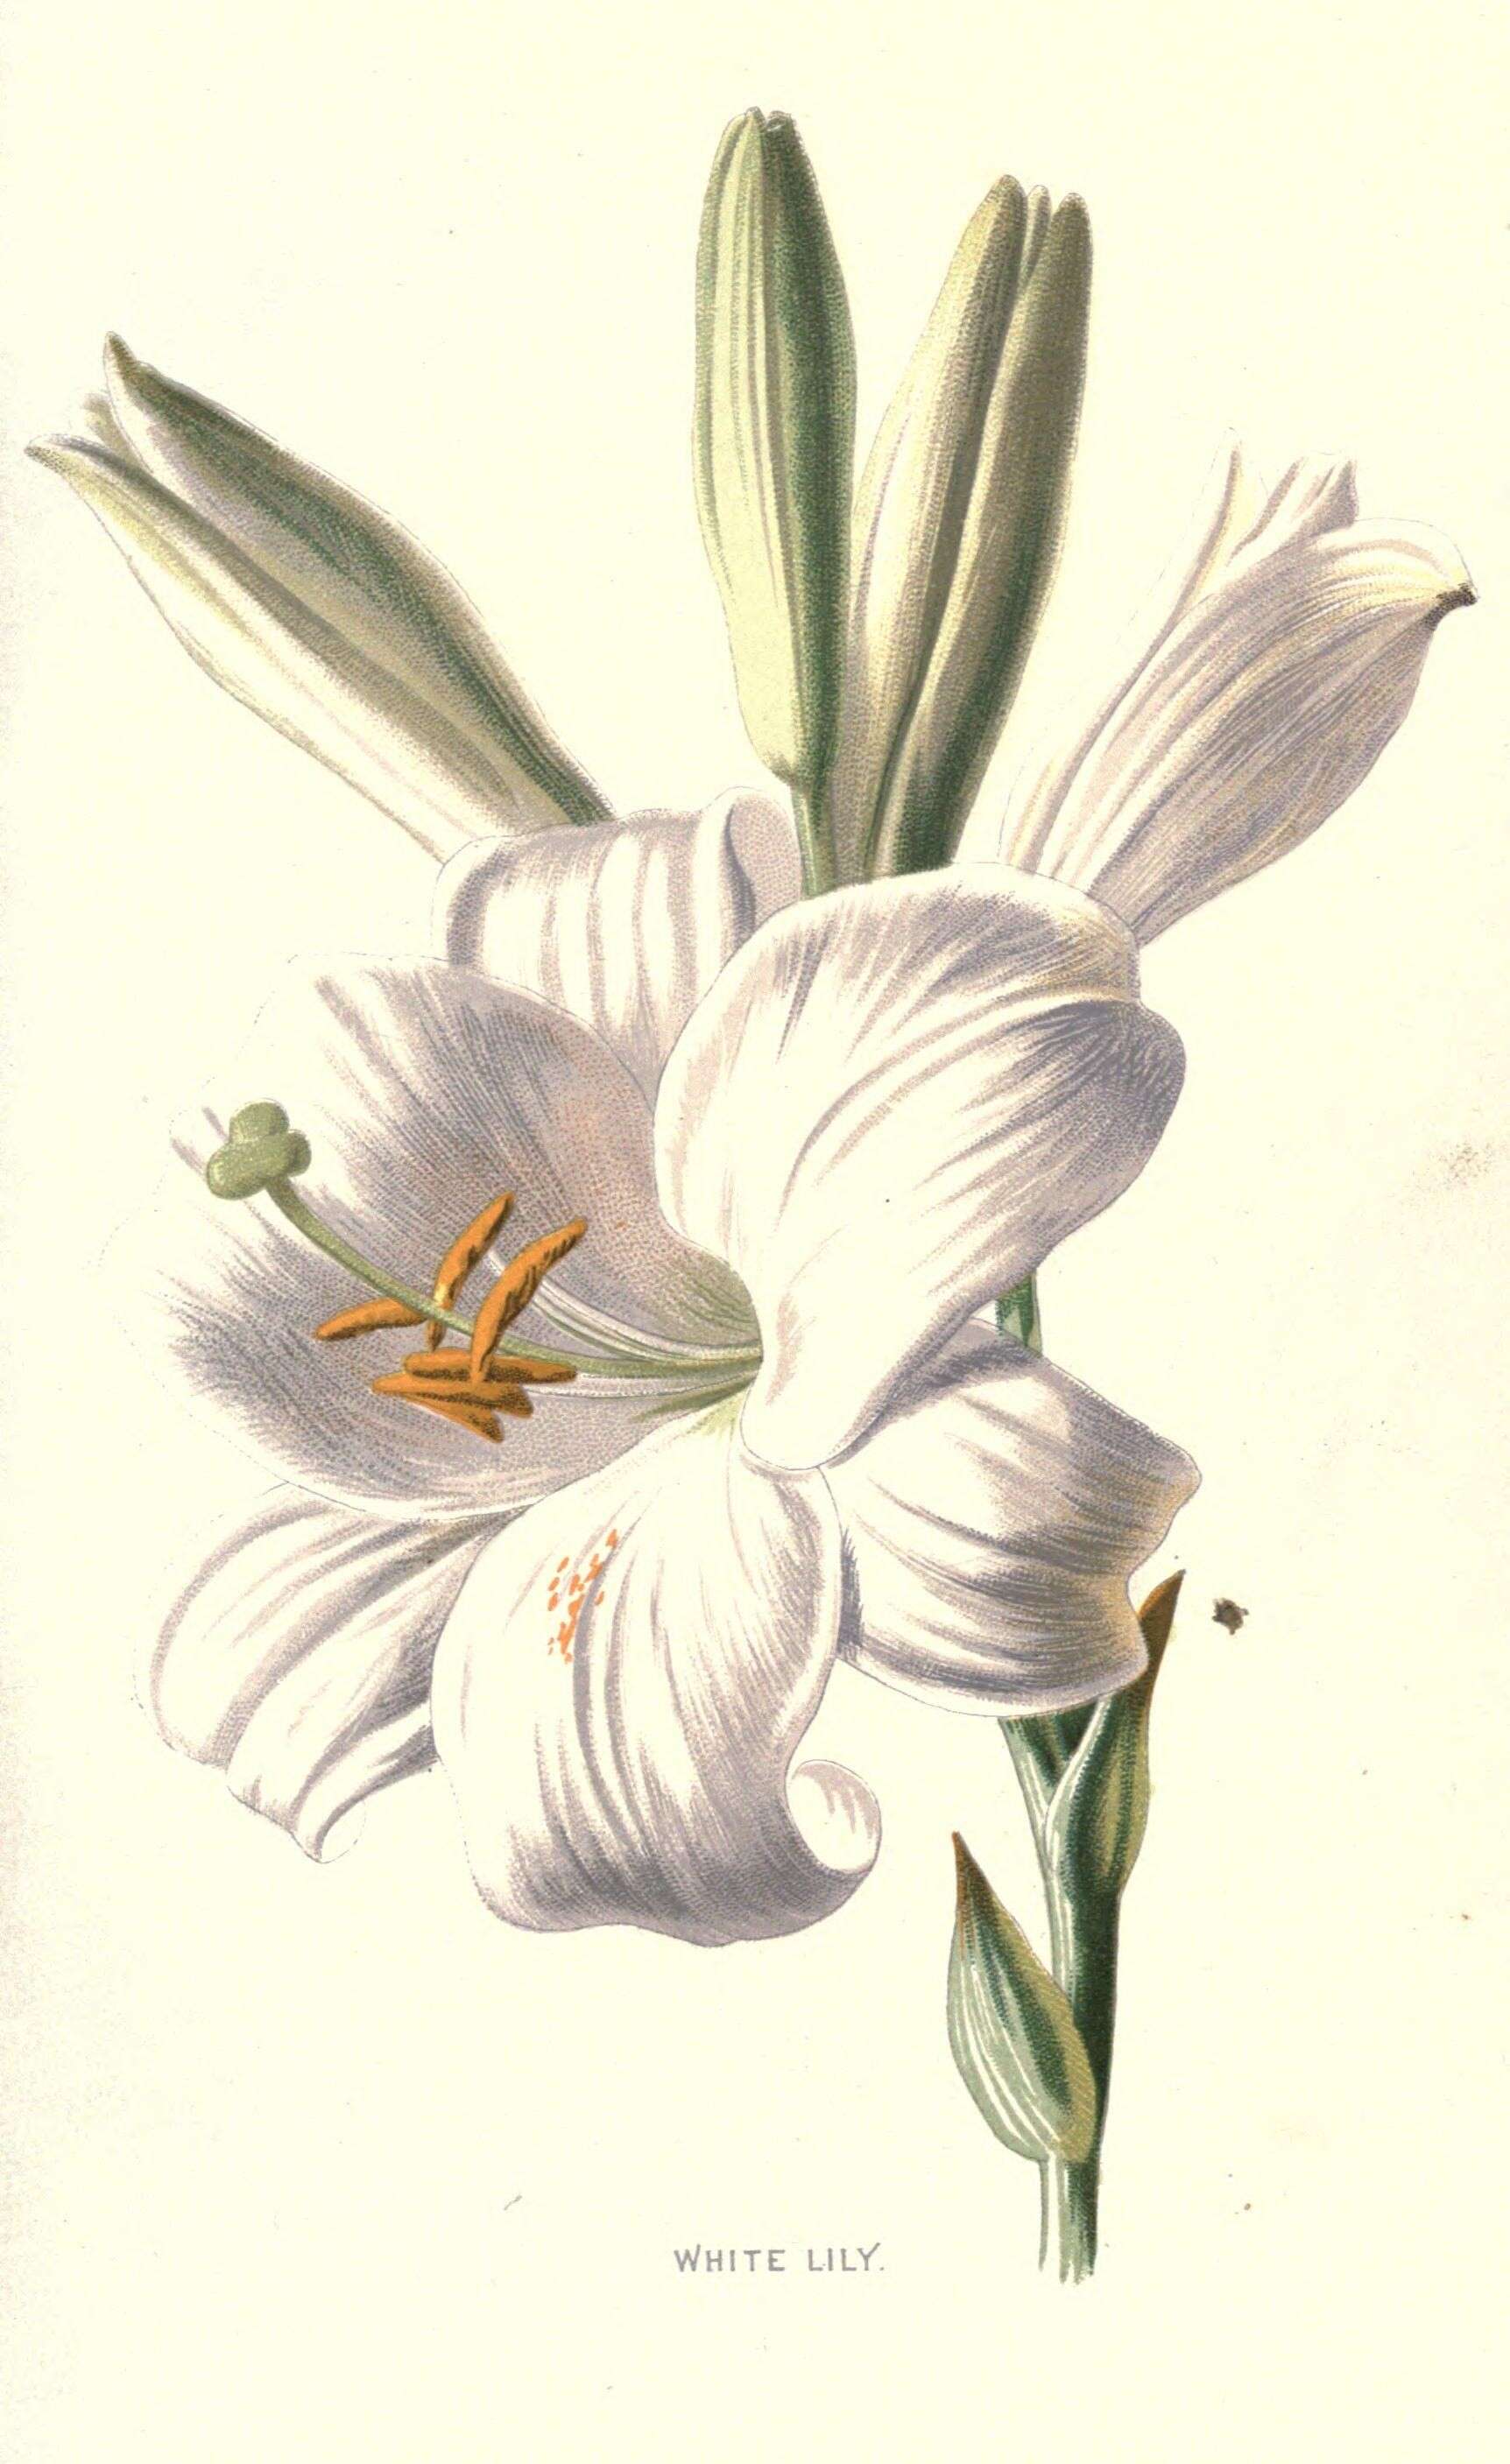 Image of lily